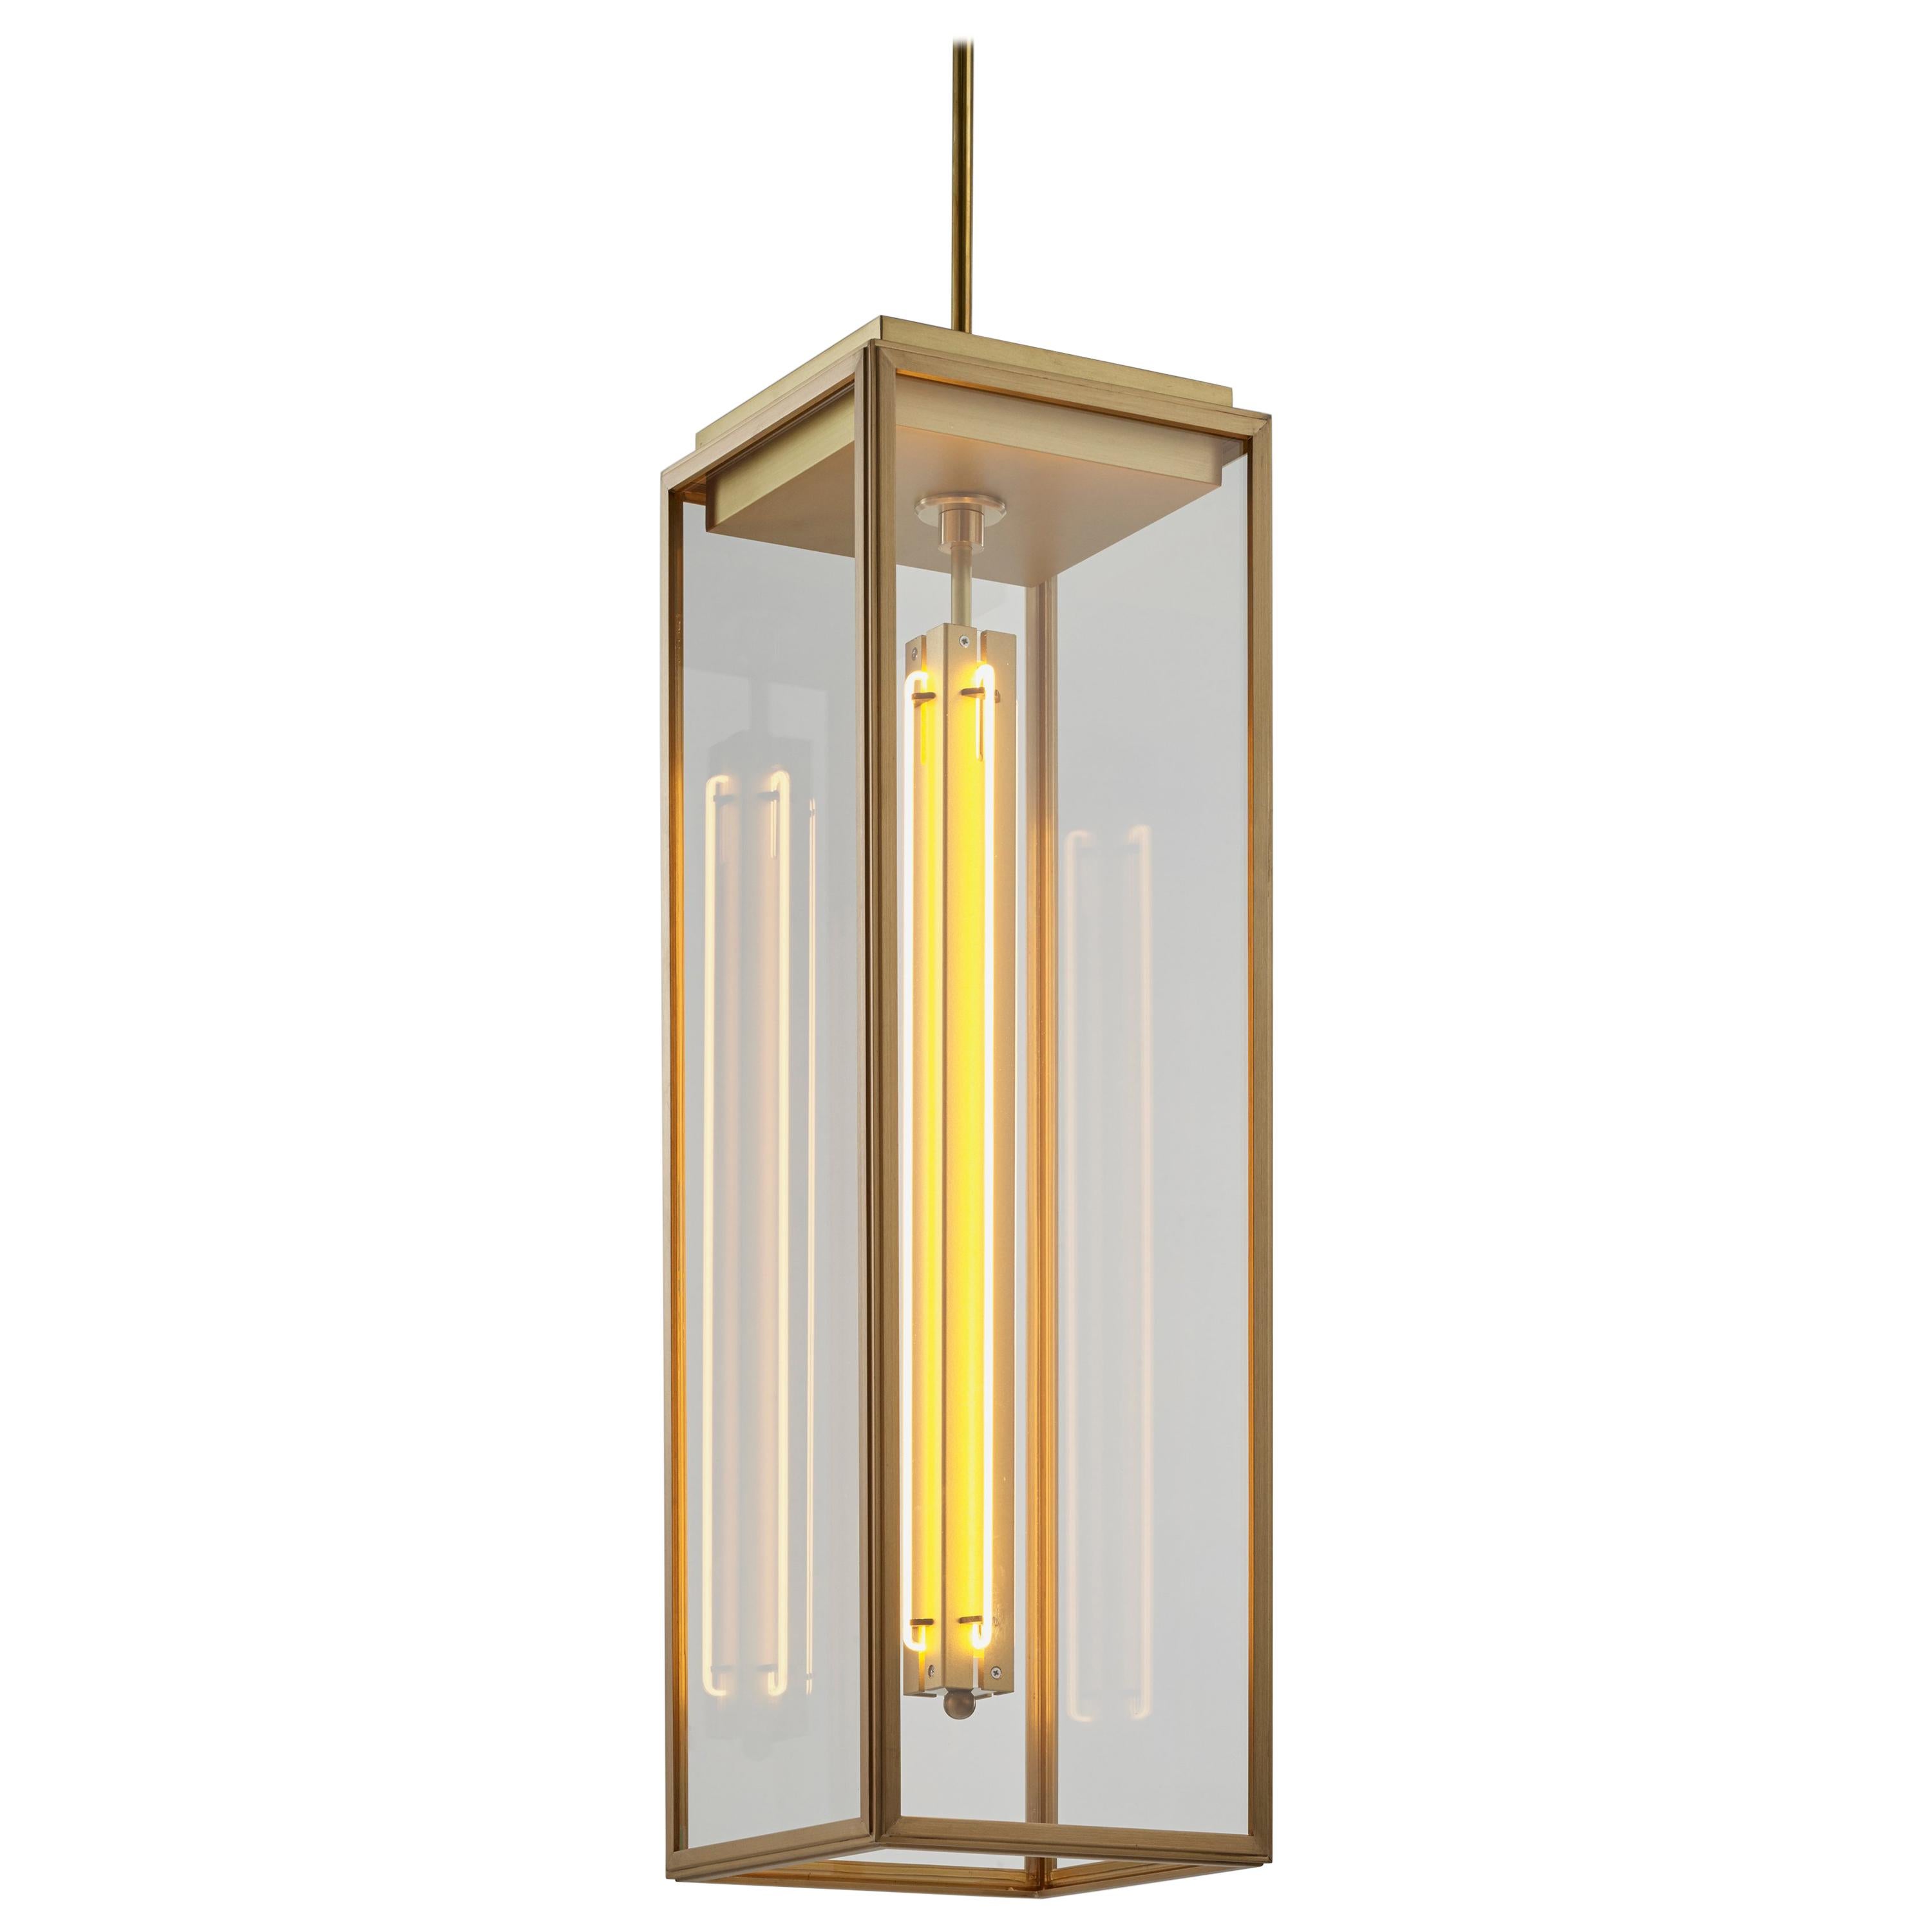 Tekna Ilford Pendant Light with Sateen Brass Finish and Clear Glass